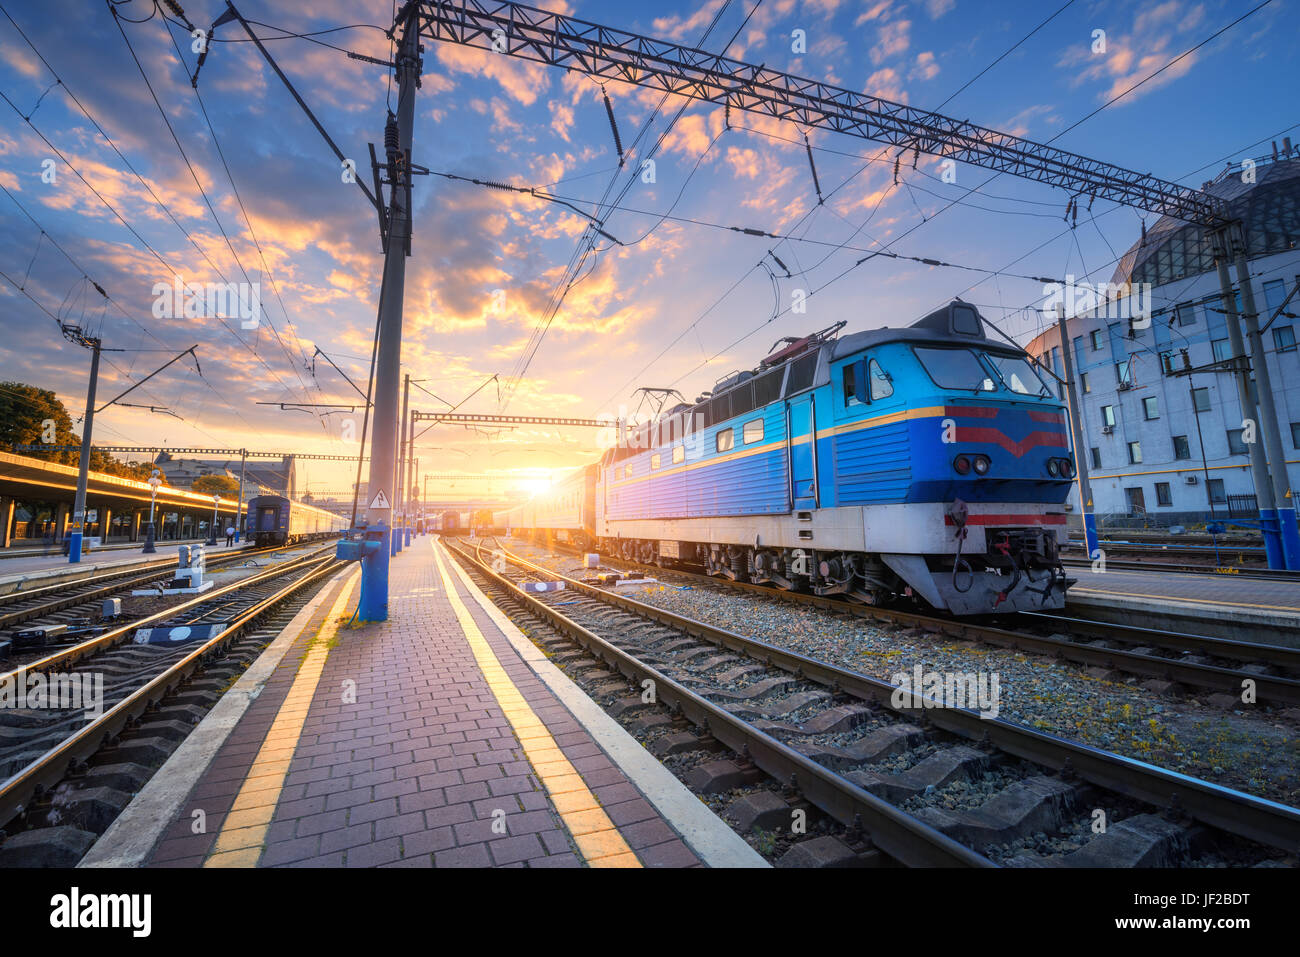 Blue train at the railway station at sunset. Amazing industrial landscape with old locomotive, old buildings, rails and colorful sunset sky with cloud Stock Photo